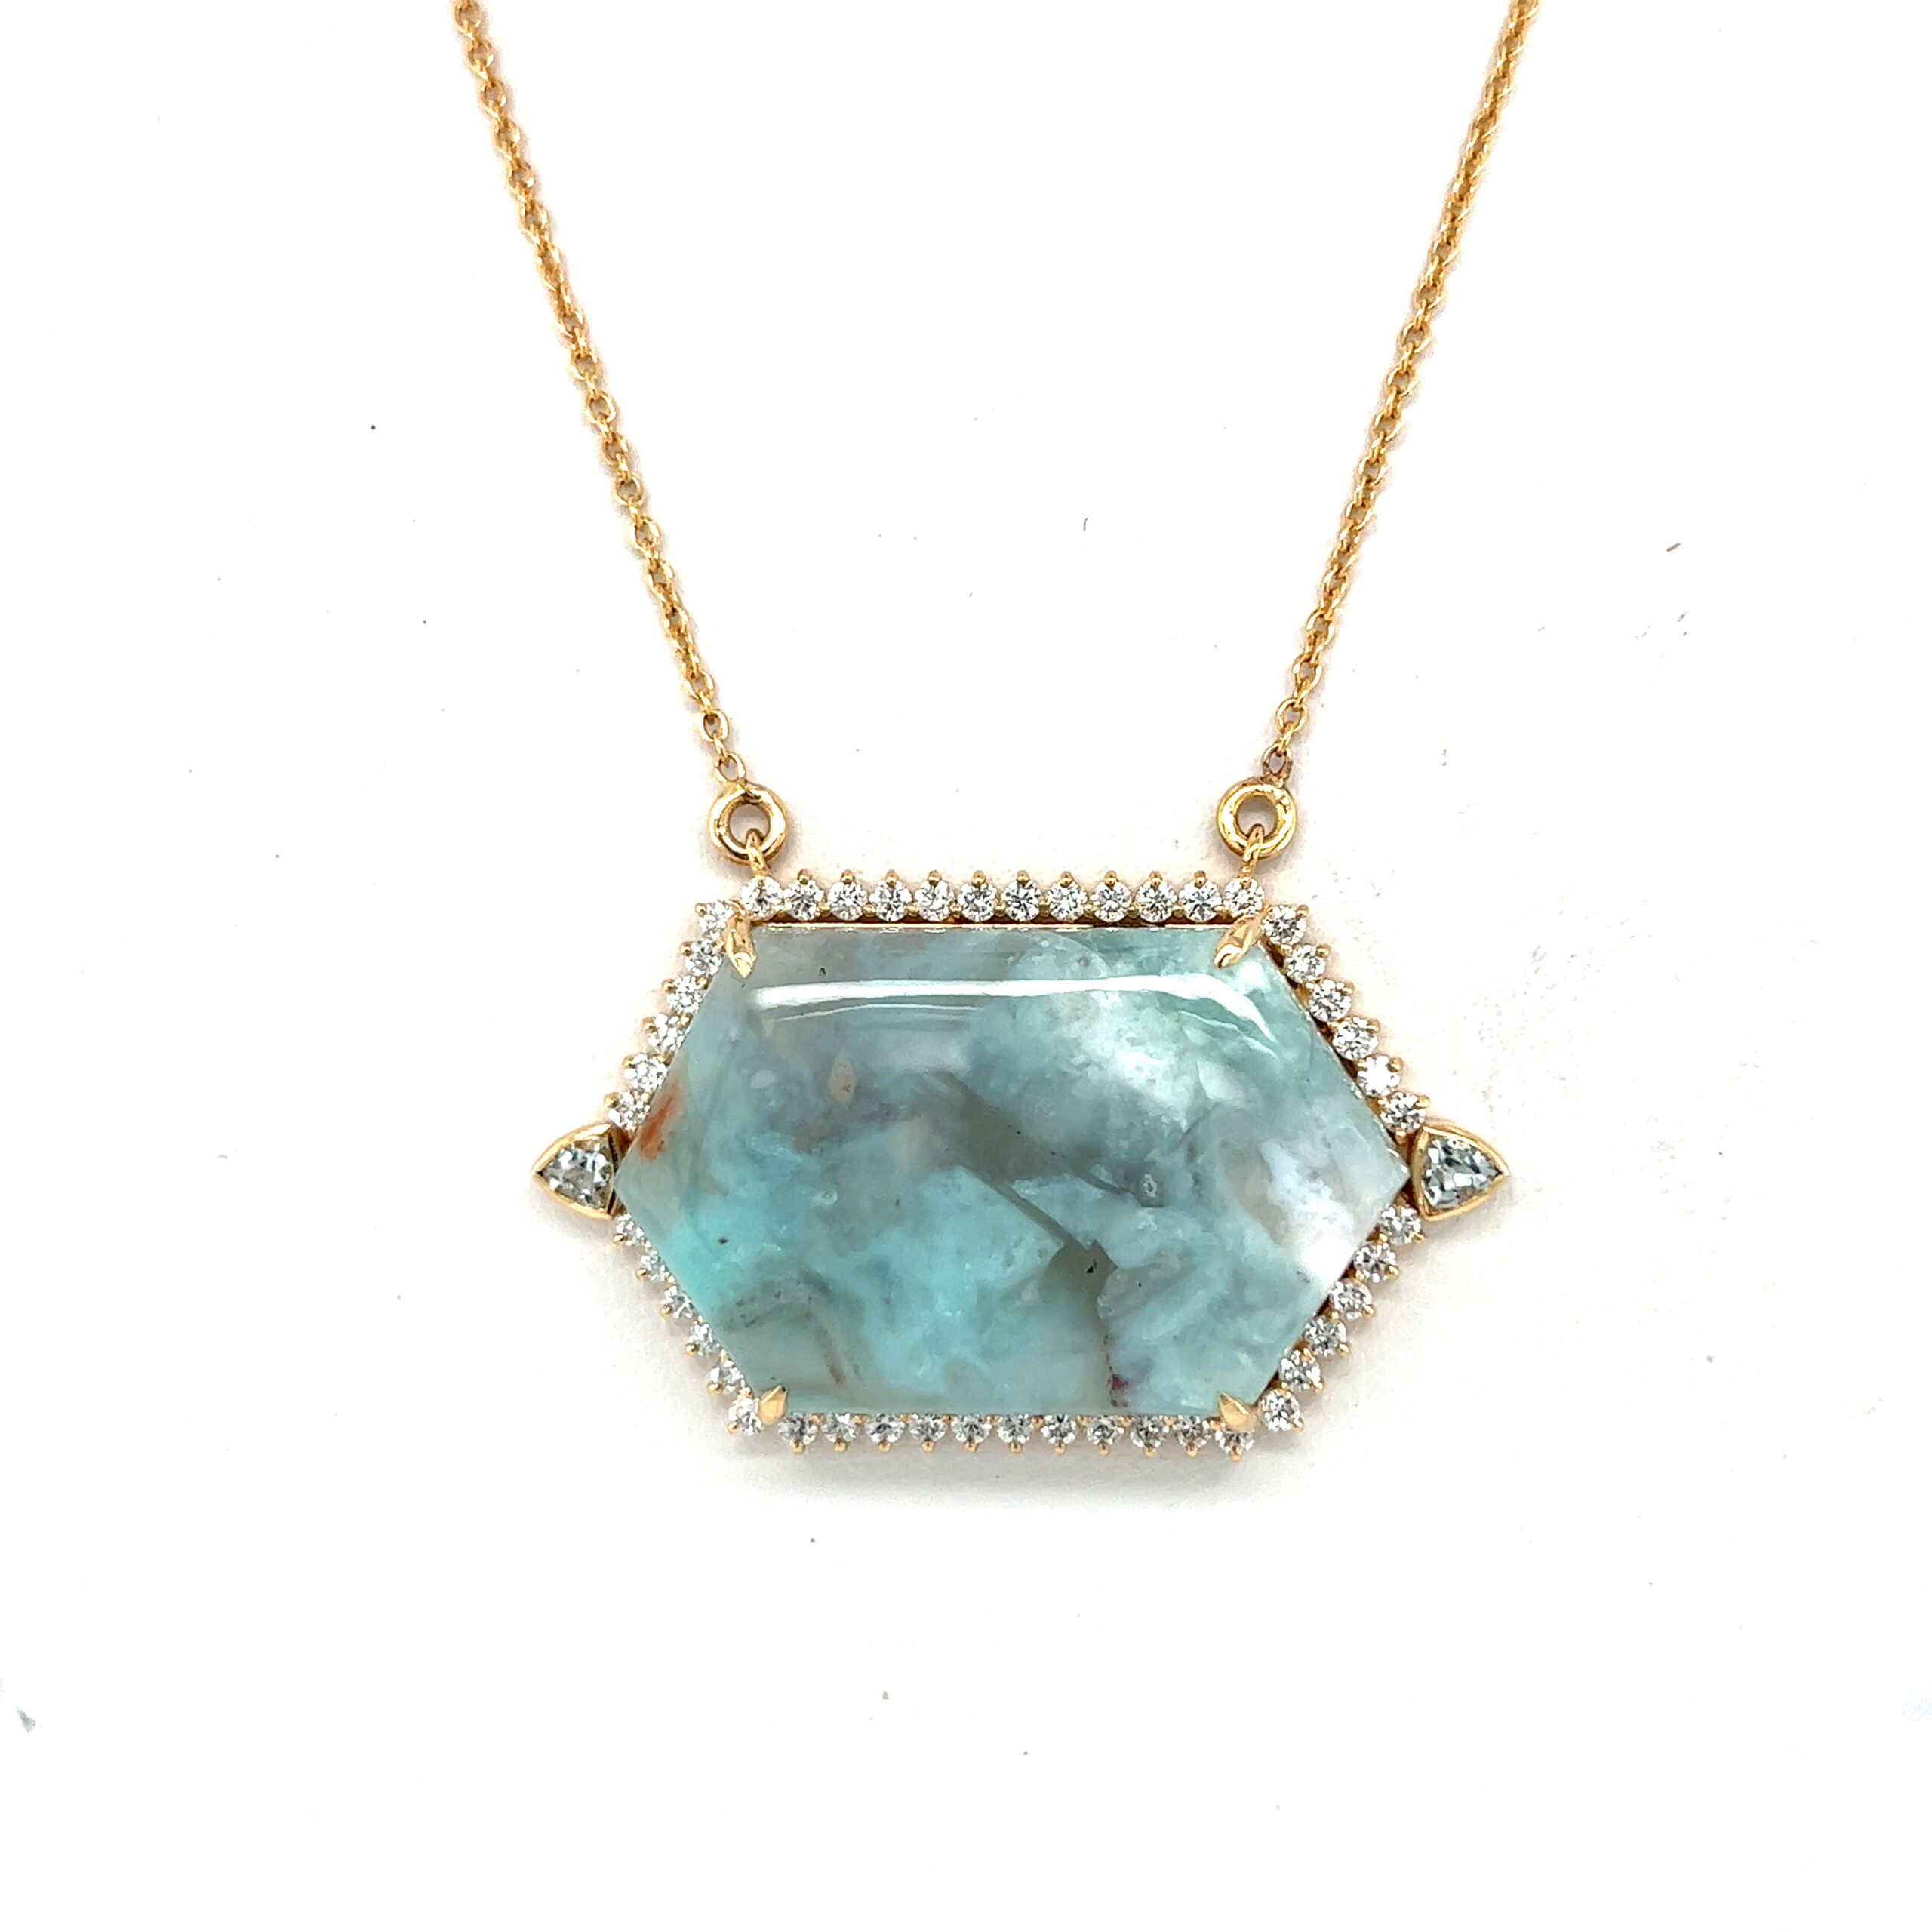 Featured image for “Summer Storm Sky Necklace”